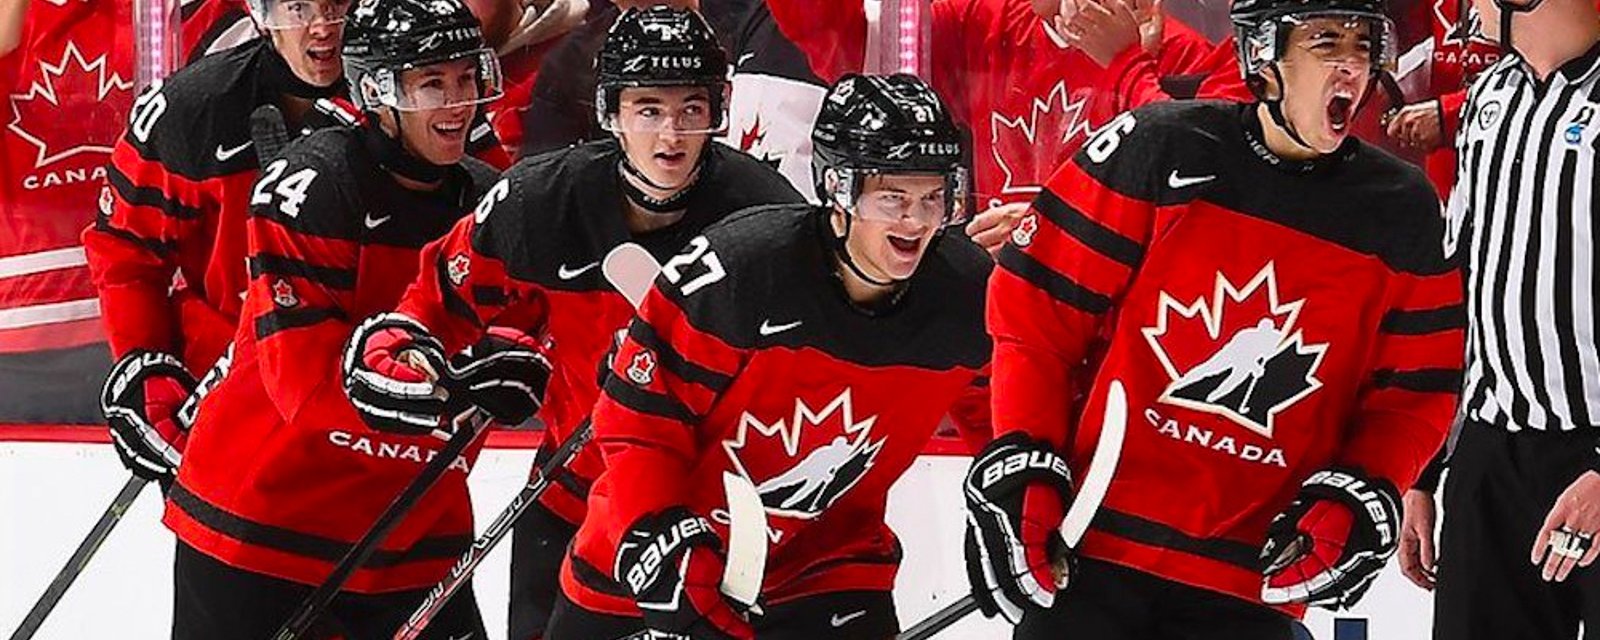 Team Canada's goal song for World Juniors is getting mixed reviews